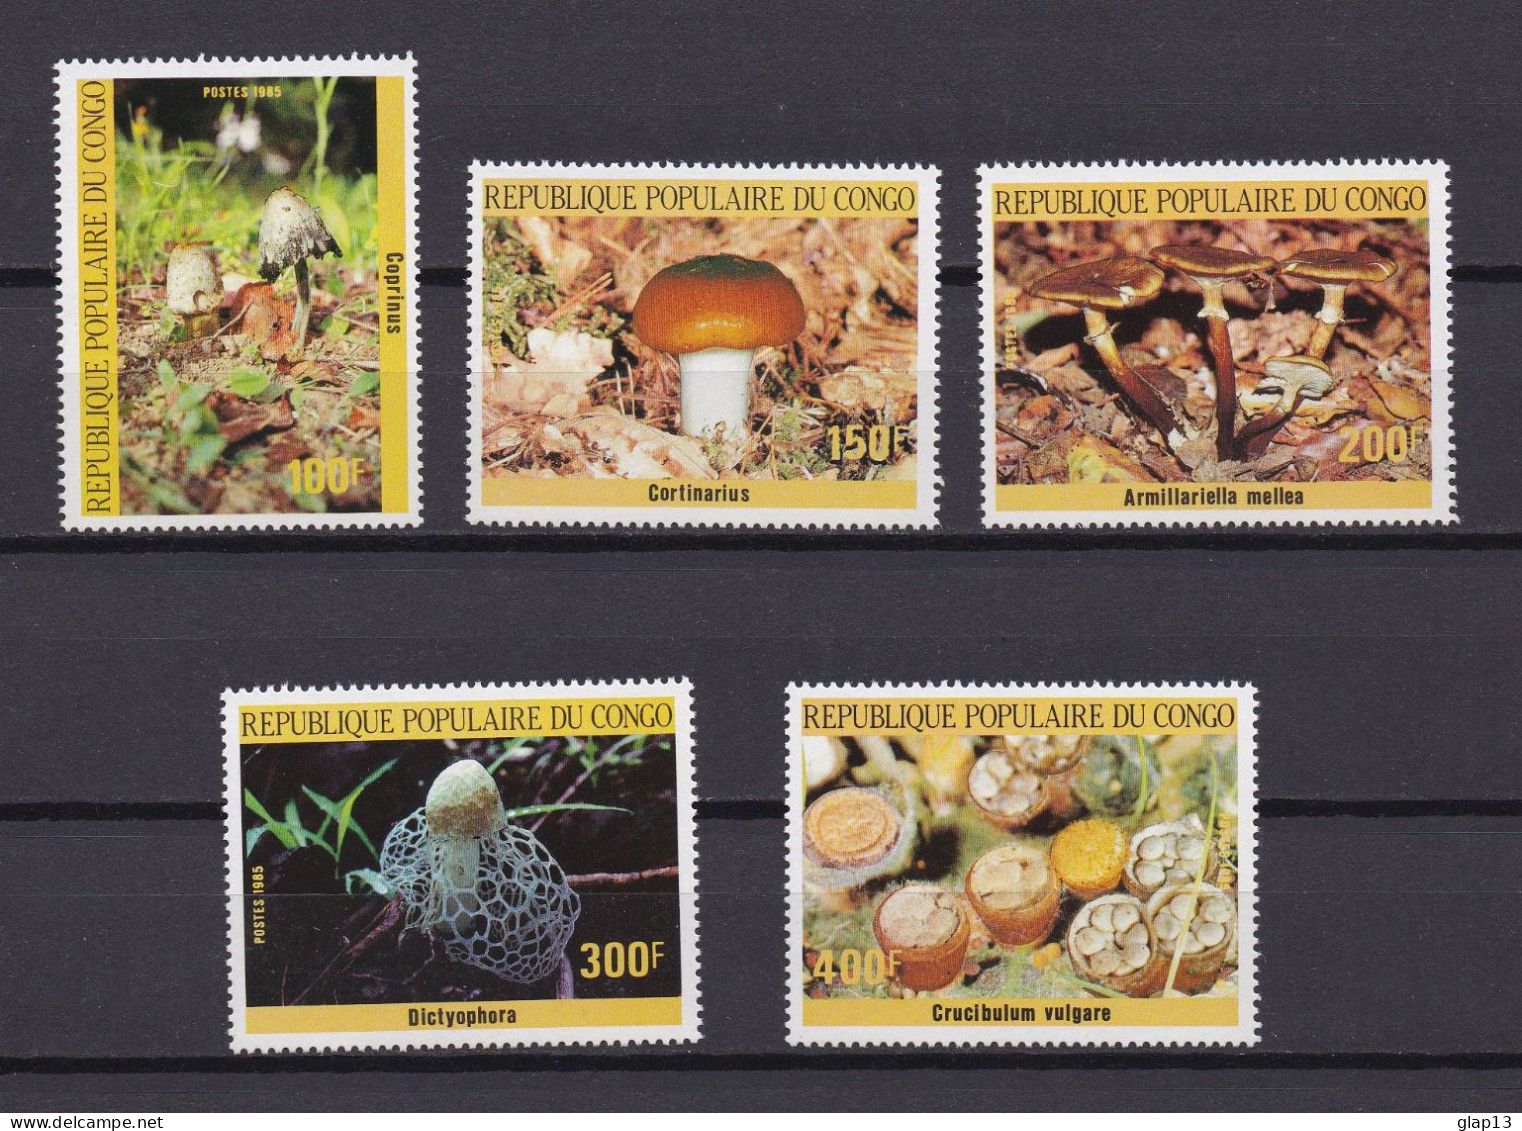 CONGO 1985 TIMBRE N°764/68 NEUF** CHAMPIGNONS - Mint/hinged